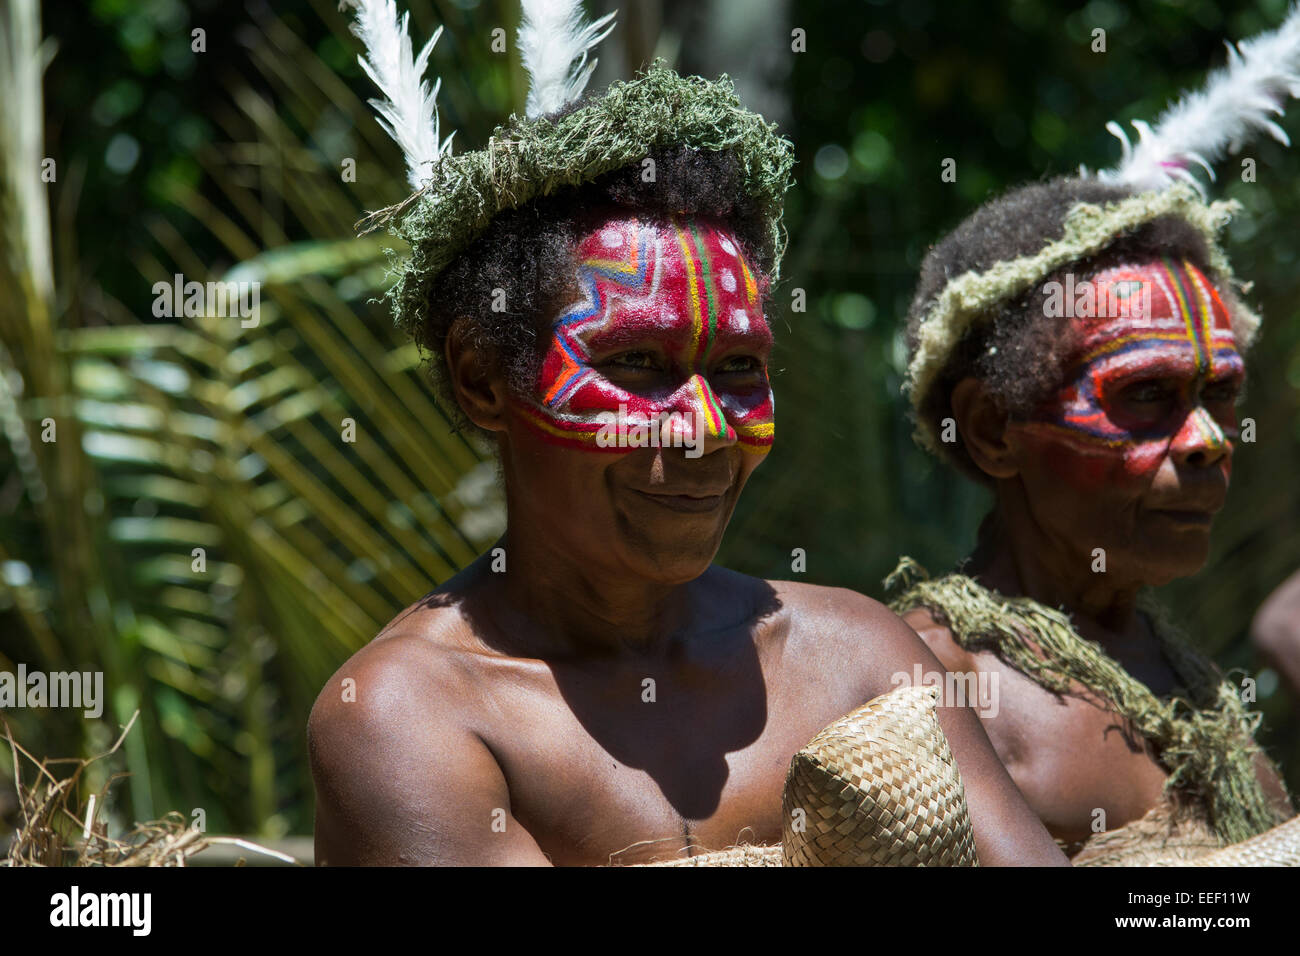 Melanesia, Vanuatu, Tanna Island. Traditional welcome ceremony, village woman with brightly painted faces. Stock Photo